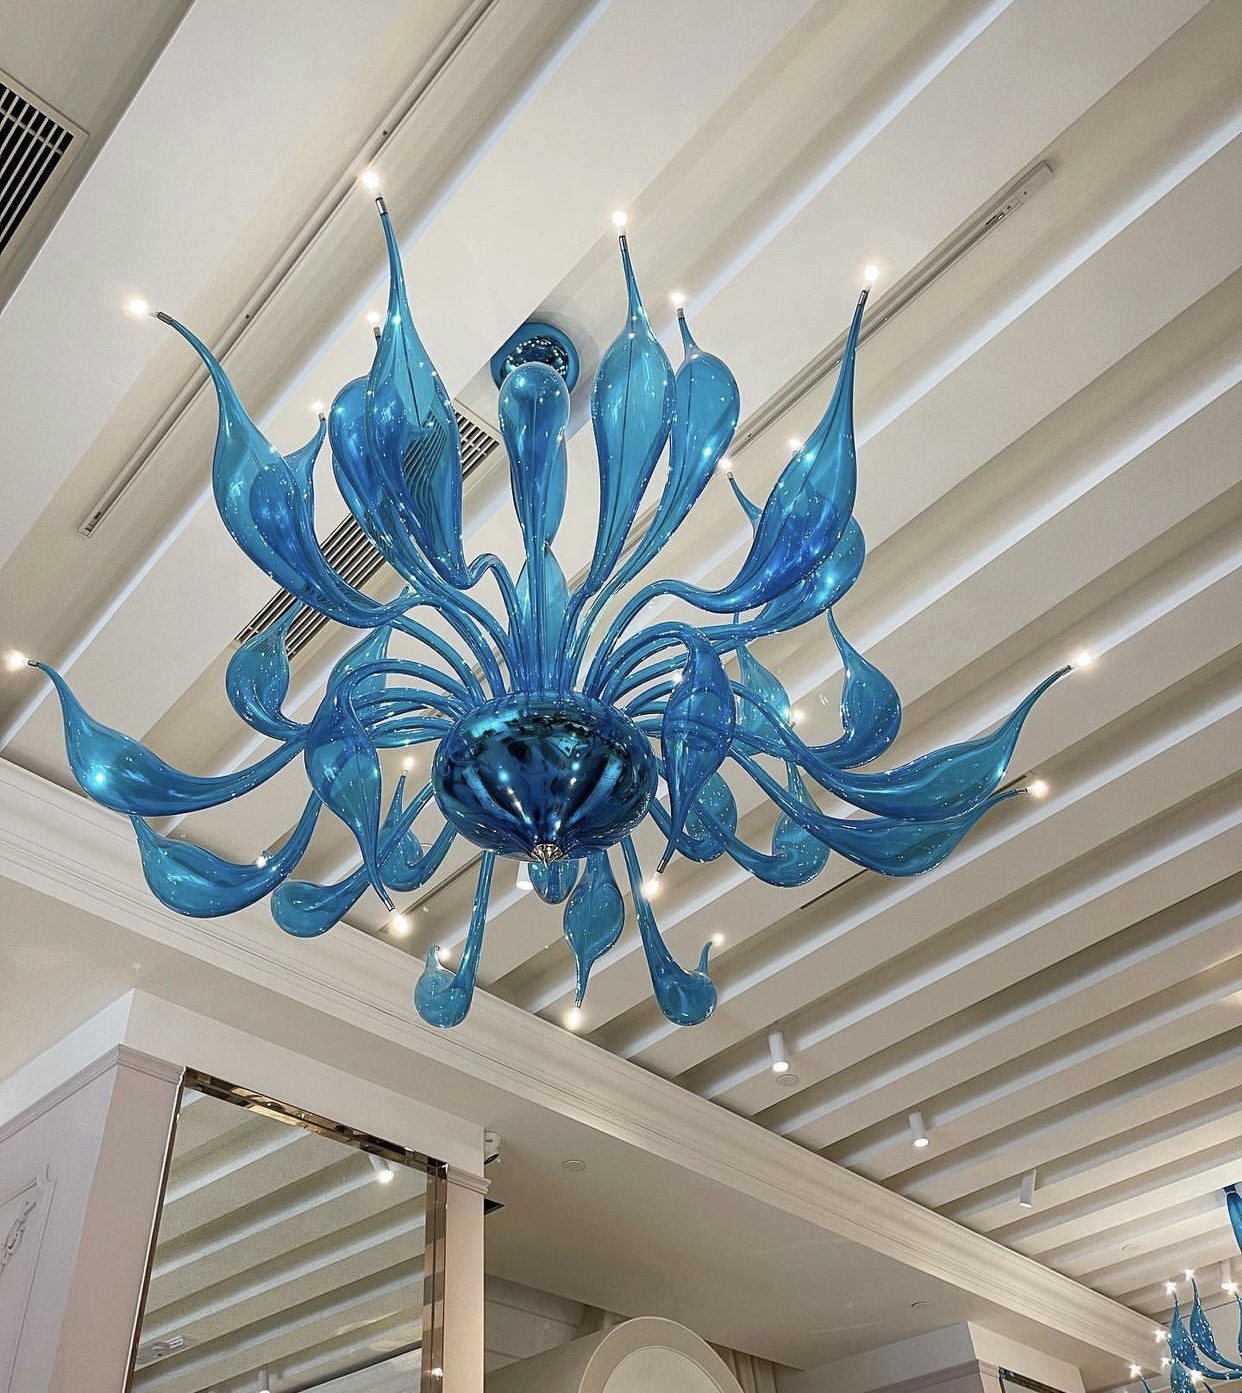 Turquoise chandelier from below